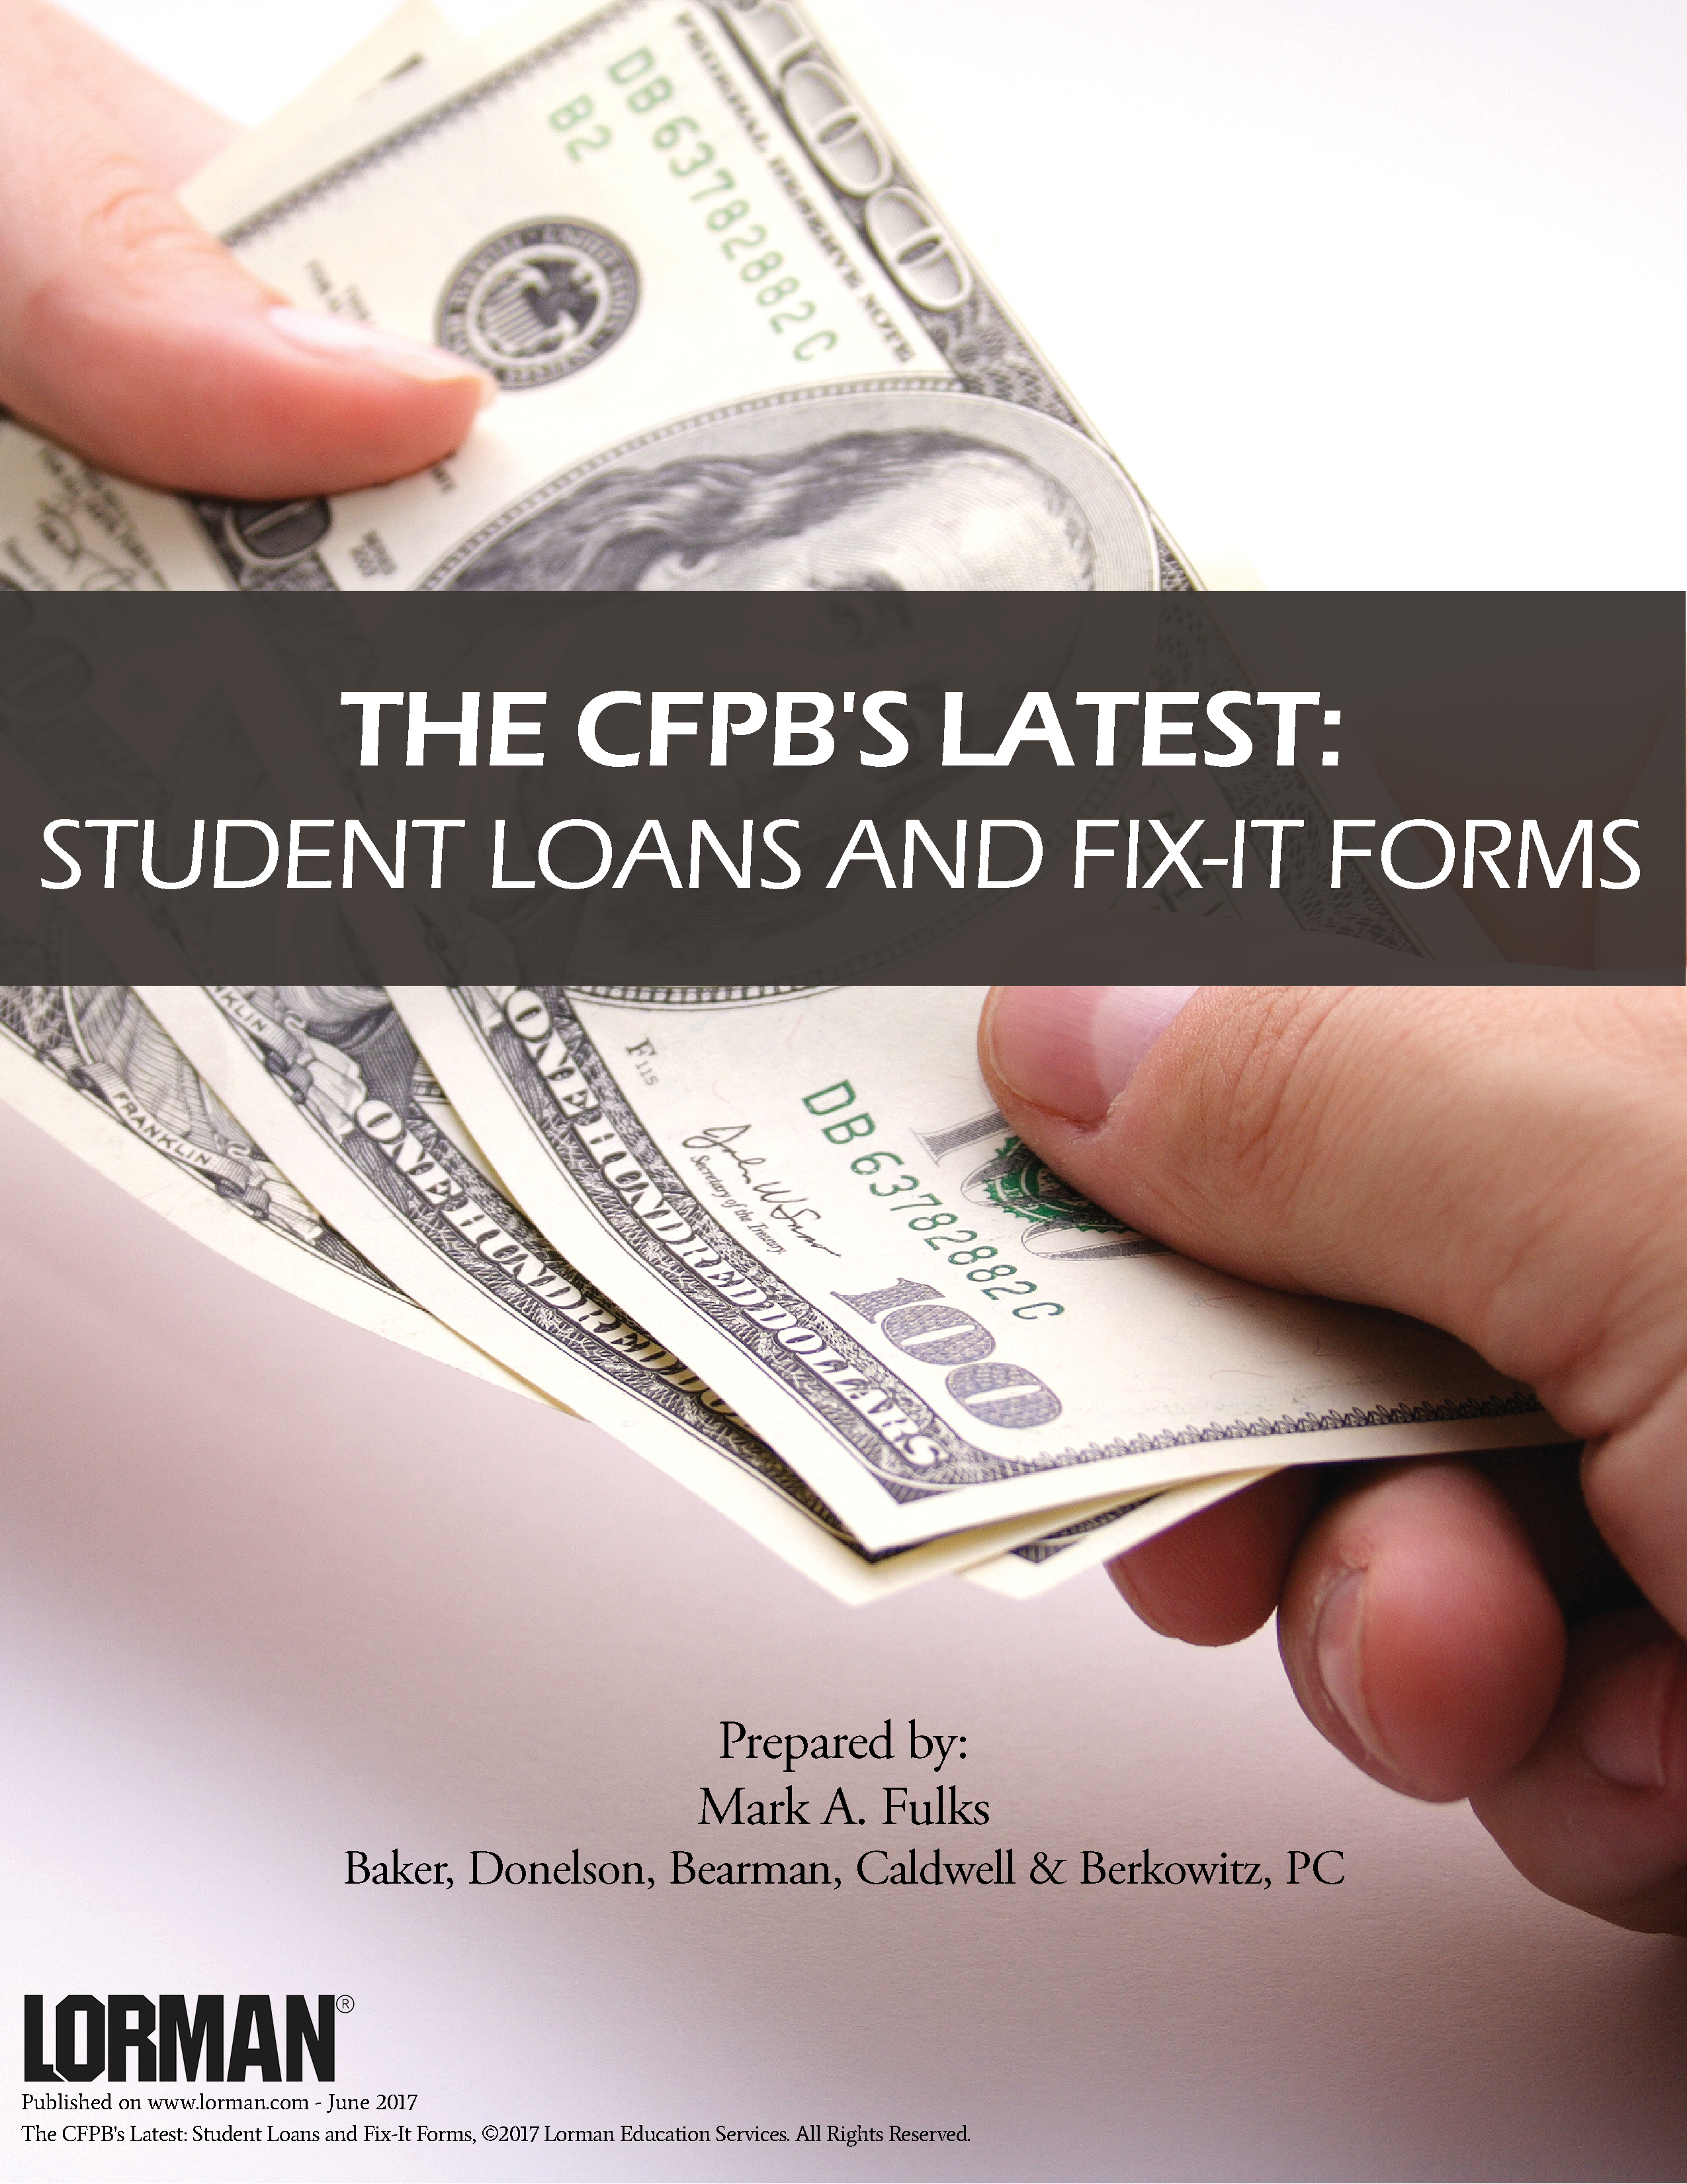 The CFPB's Latest: Student Loans and Fix-It Forms